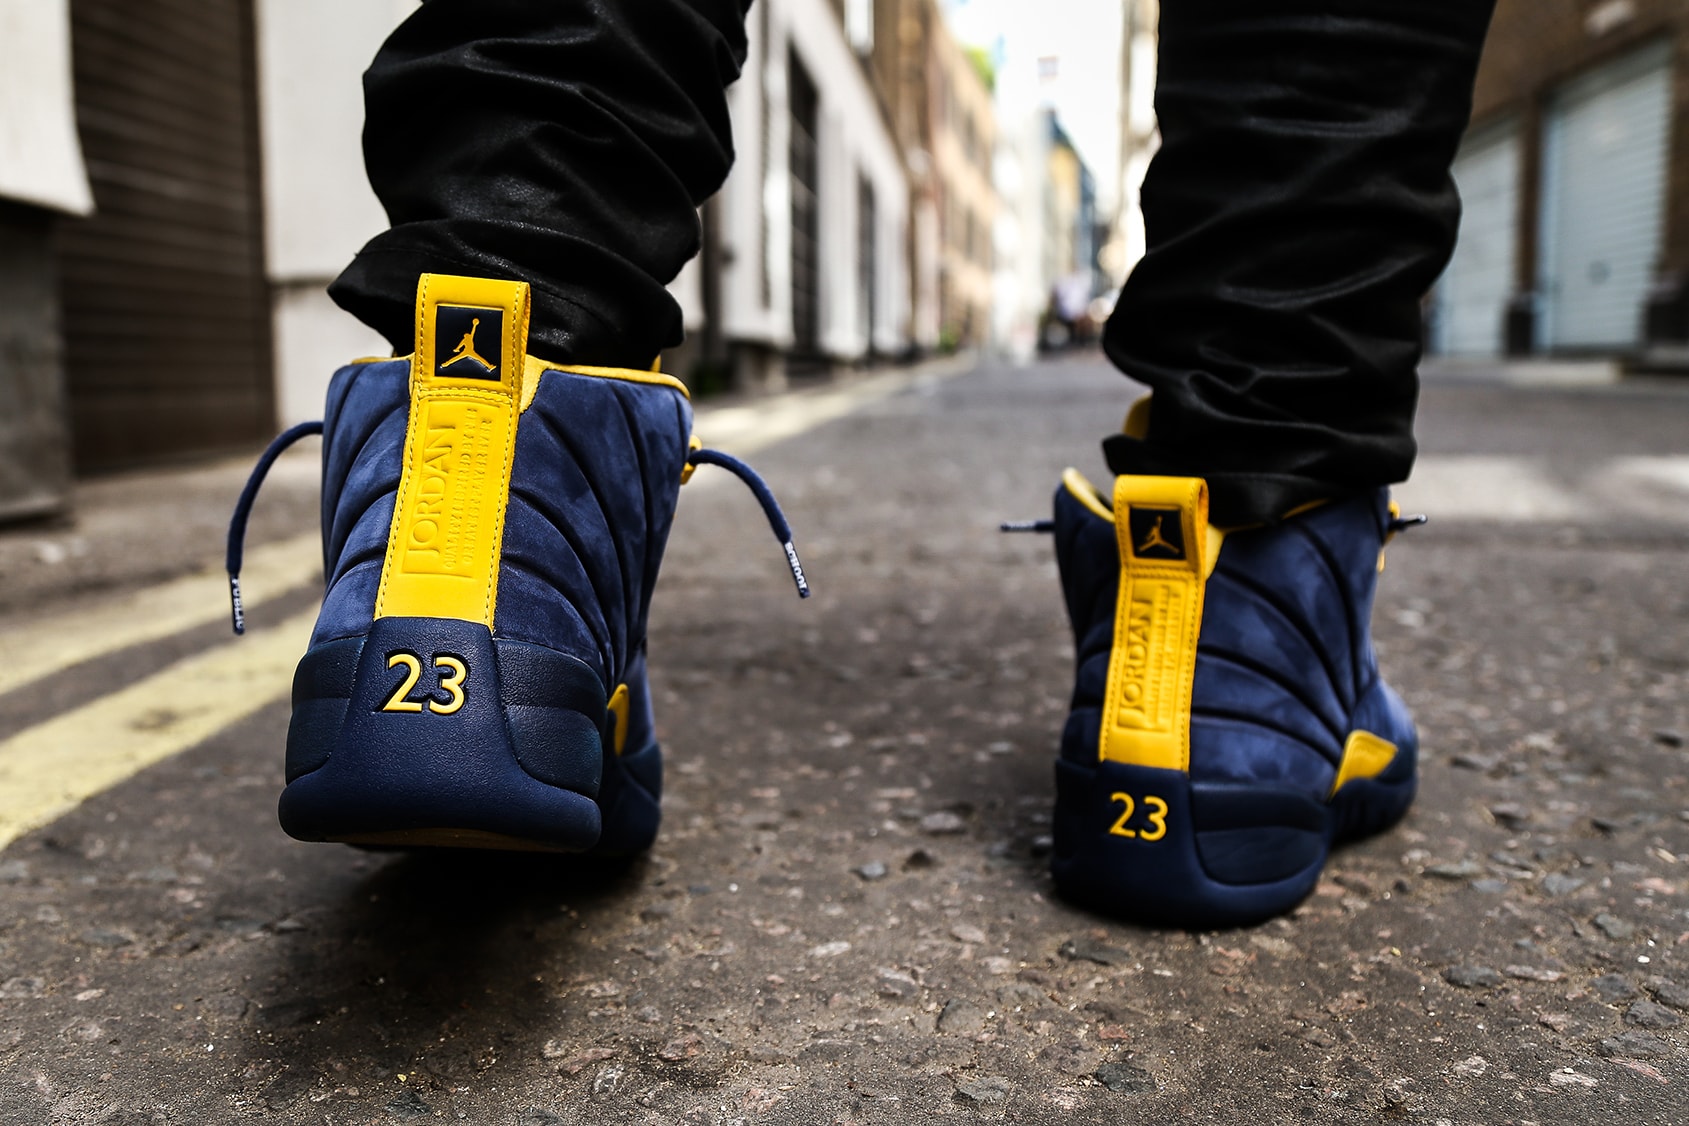 Air Jordan 12 x Public School NY "Michigan" Friends & Family Closer Look Sneakers Kicks Shoes Trainers Collab Collaboration Rare Coming Releasing Soon